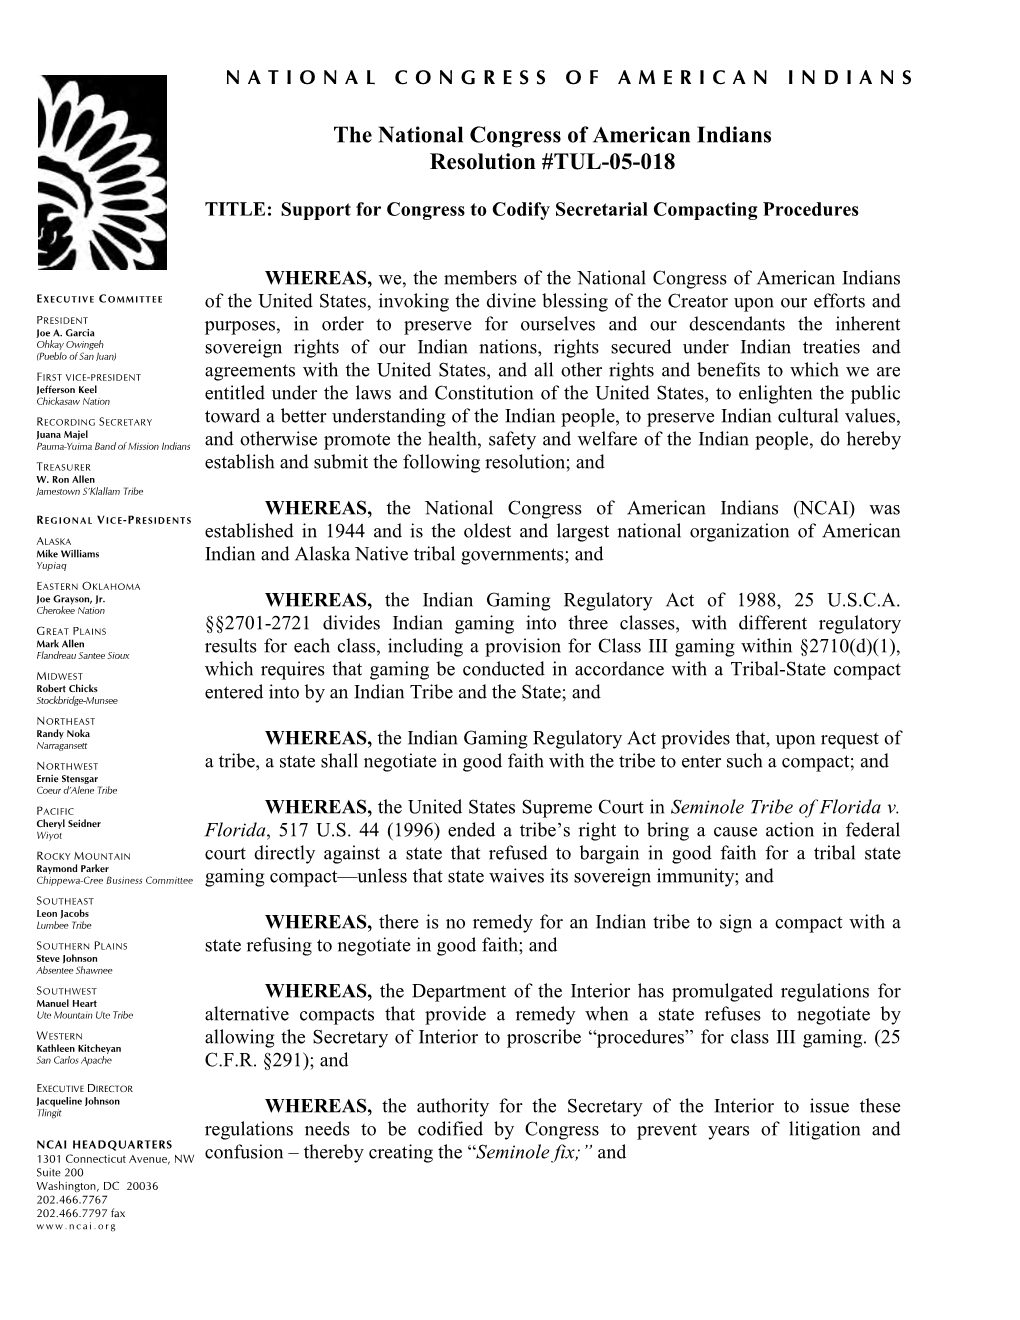 The National Congress of American Indians Resolution #TUL-05-018